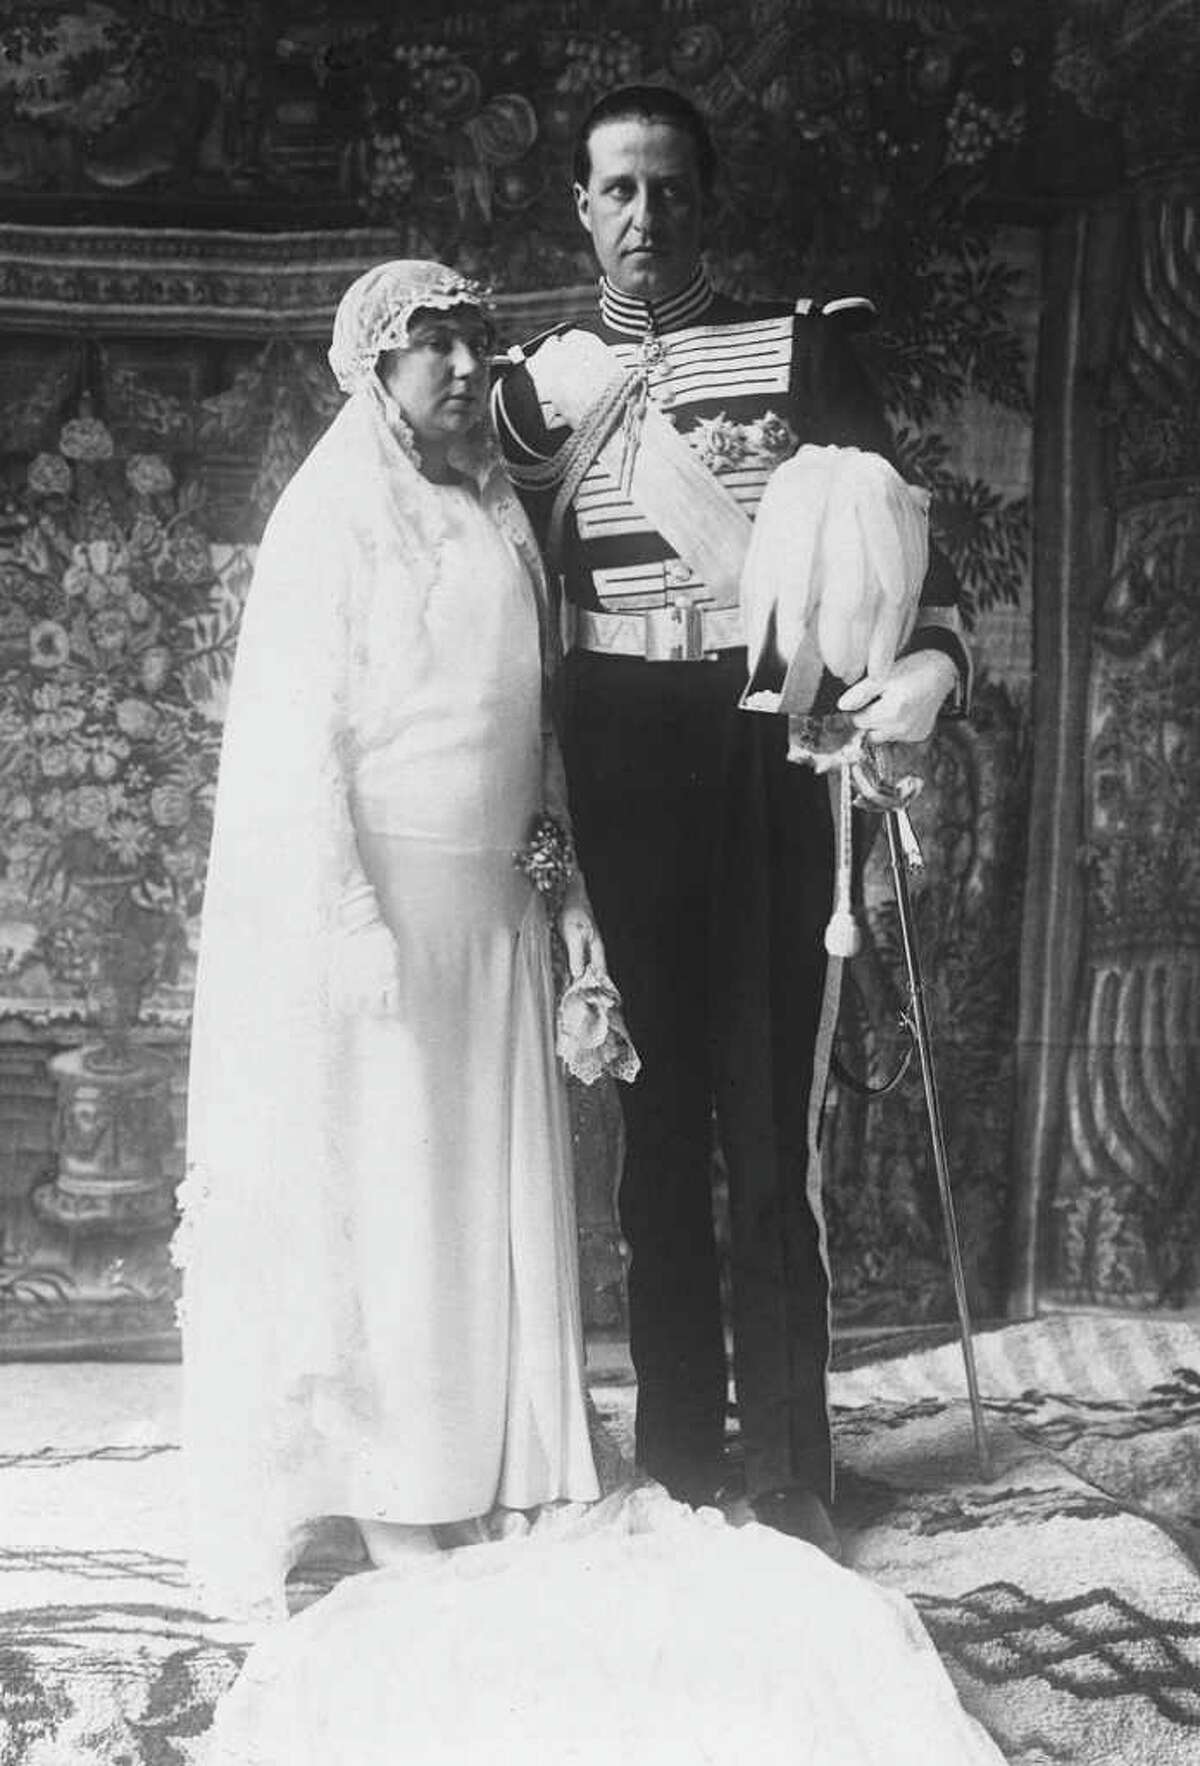 Formal picture following the wedding of Infanta Isabel Alfonsa of Spain, and Count Zemoisky Jan Kany of Poland, that took place in the Chapel of the Royal Palace, in Madrid, March 9, 1929. (AP Photo)